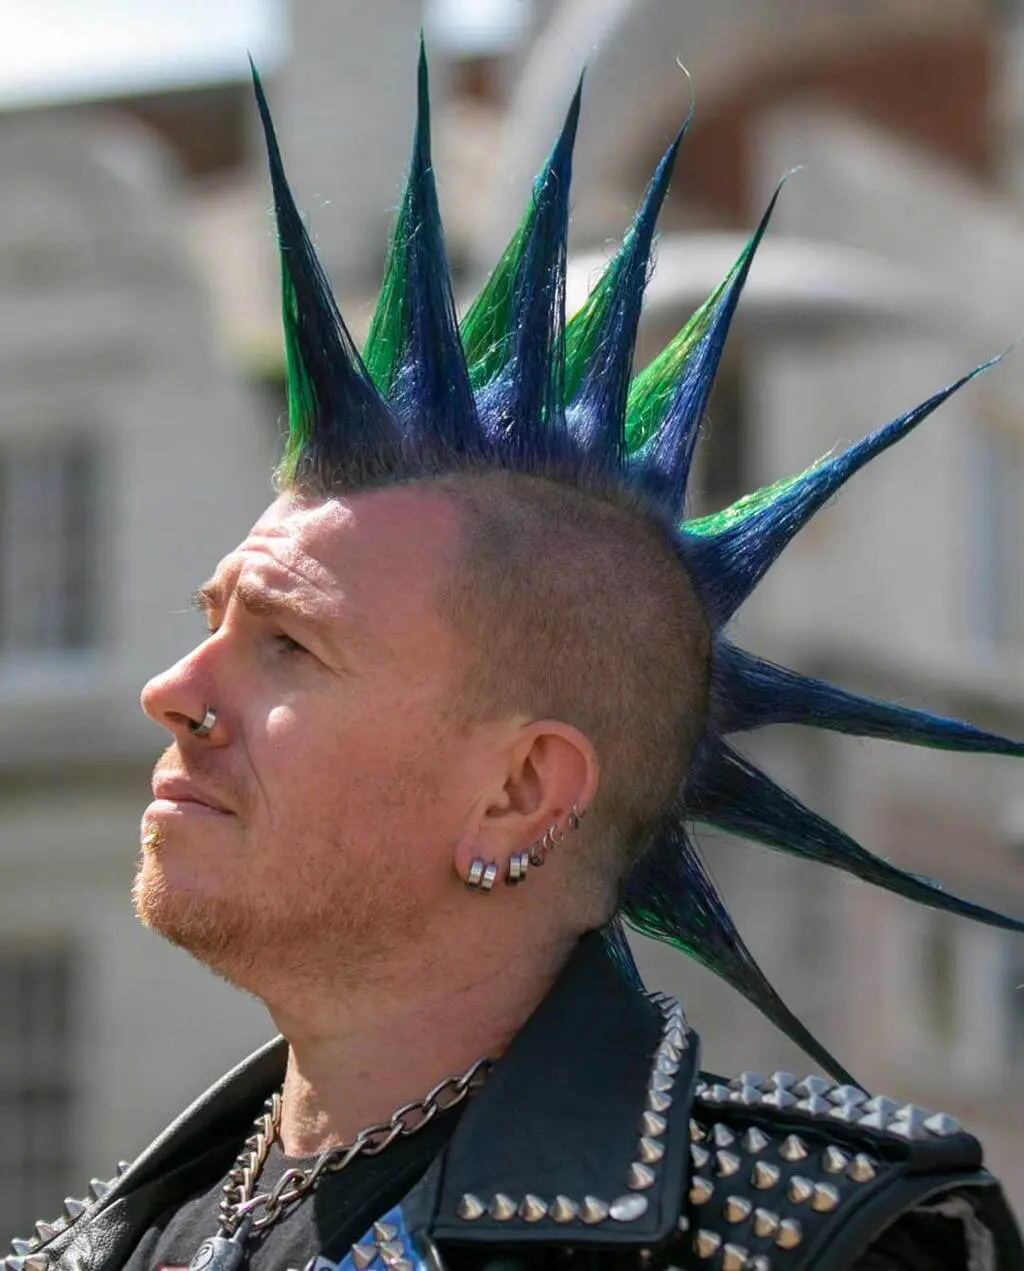 Liberty Spikes Punk Hairstyles for guys